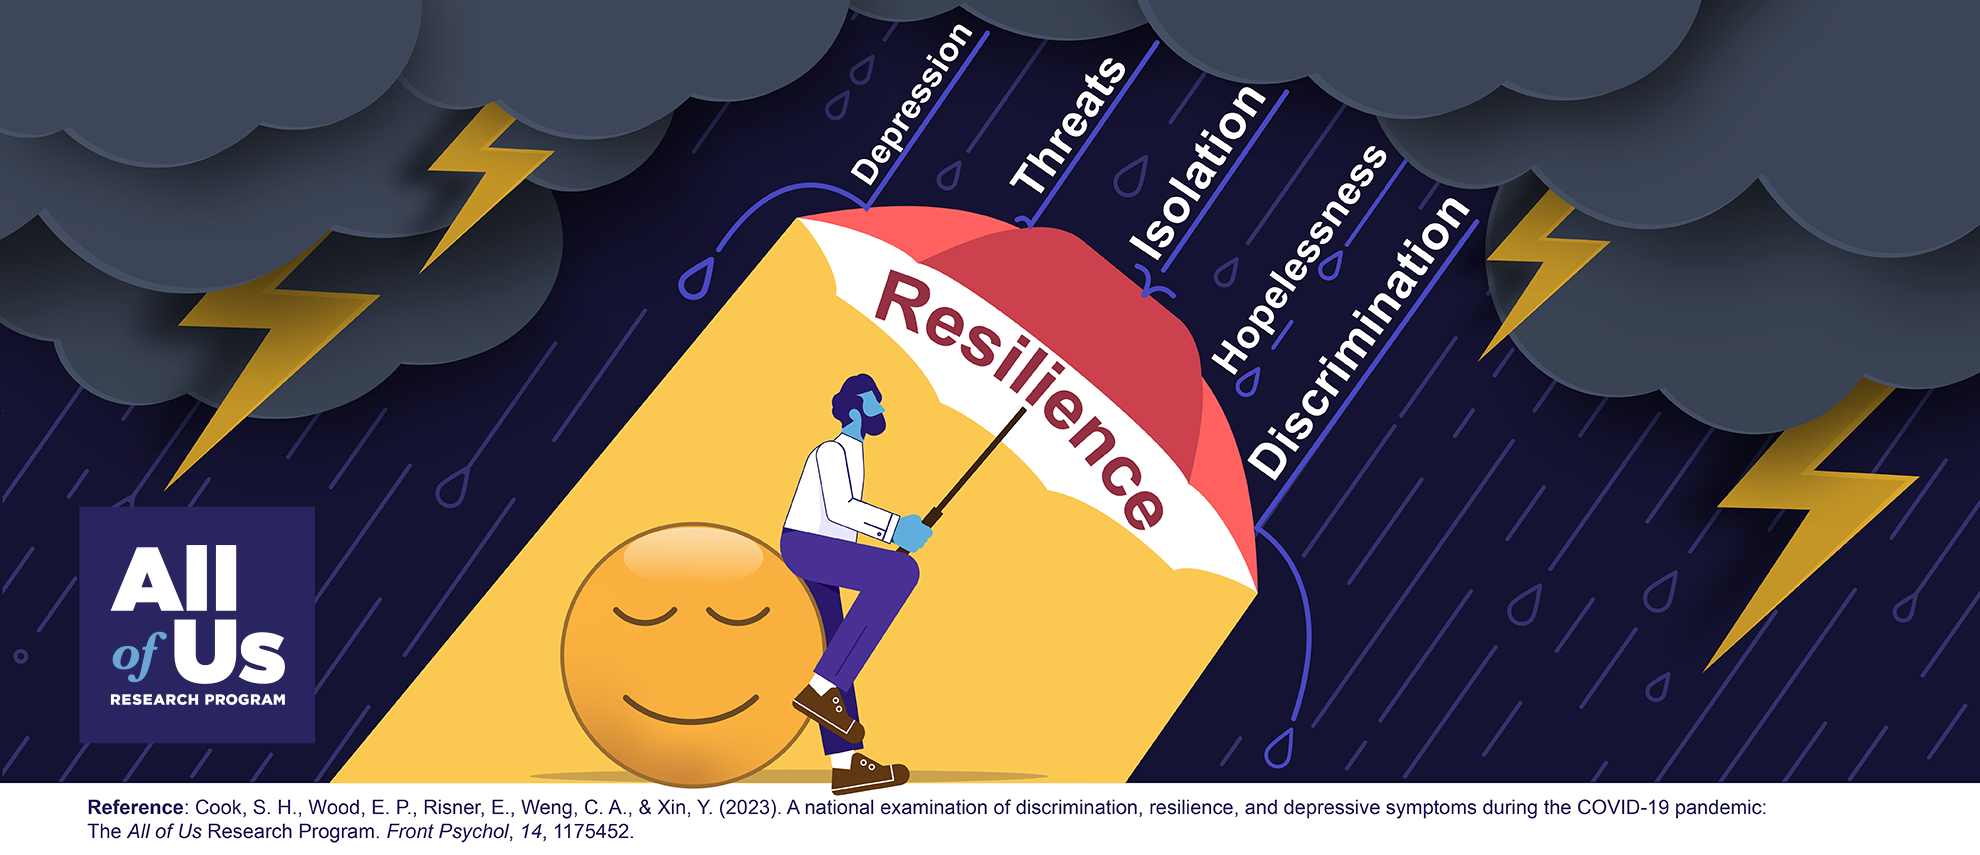 A cartoon illustration of a person with an umbrella in a rainstorm with lightening overhead. Raindrops are labeled “Depression,” “Threats,” “Isolation,” “Hopelessness,” and “Discrimination.” The umbrella is labeled “Resilience,” and under the umbrella, the person is in sunlight and seated on an illustration of a sleeping sun. Logo of the All of Us Research Program.